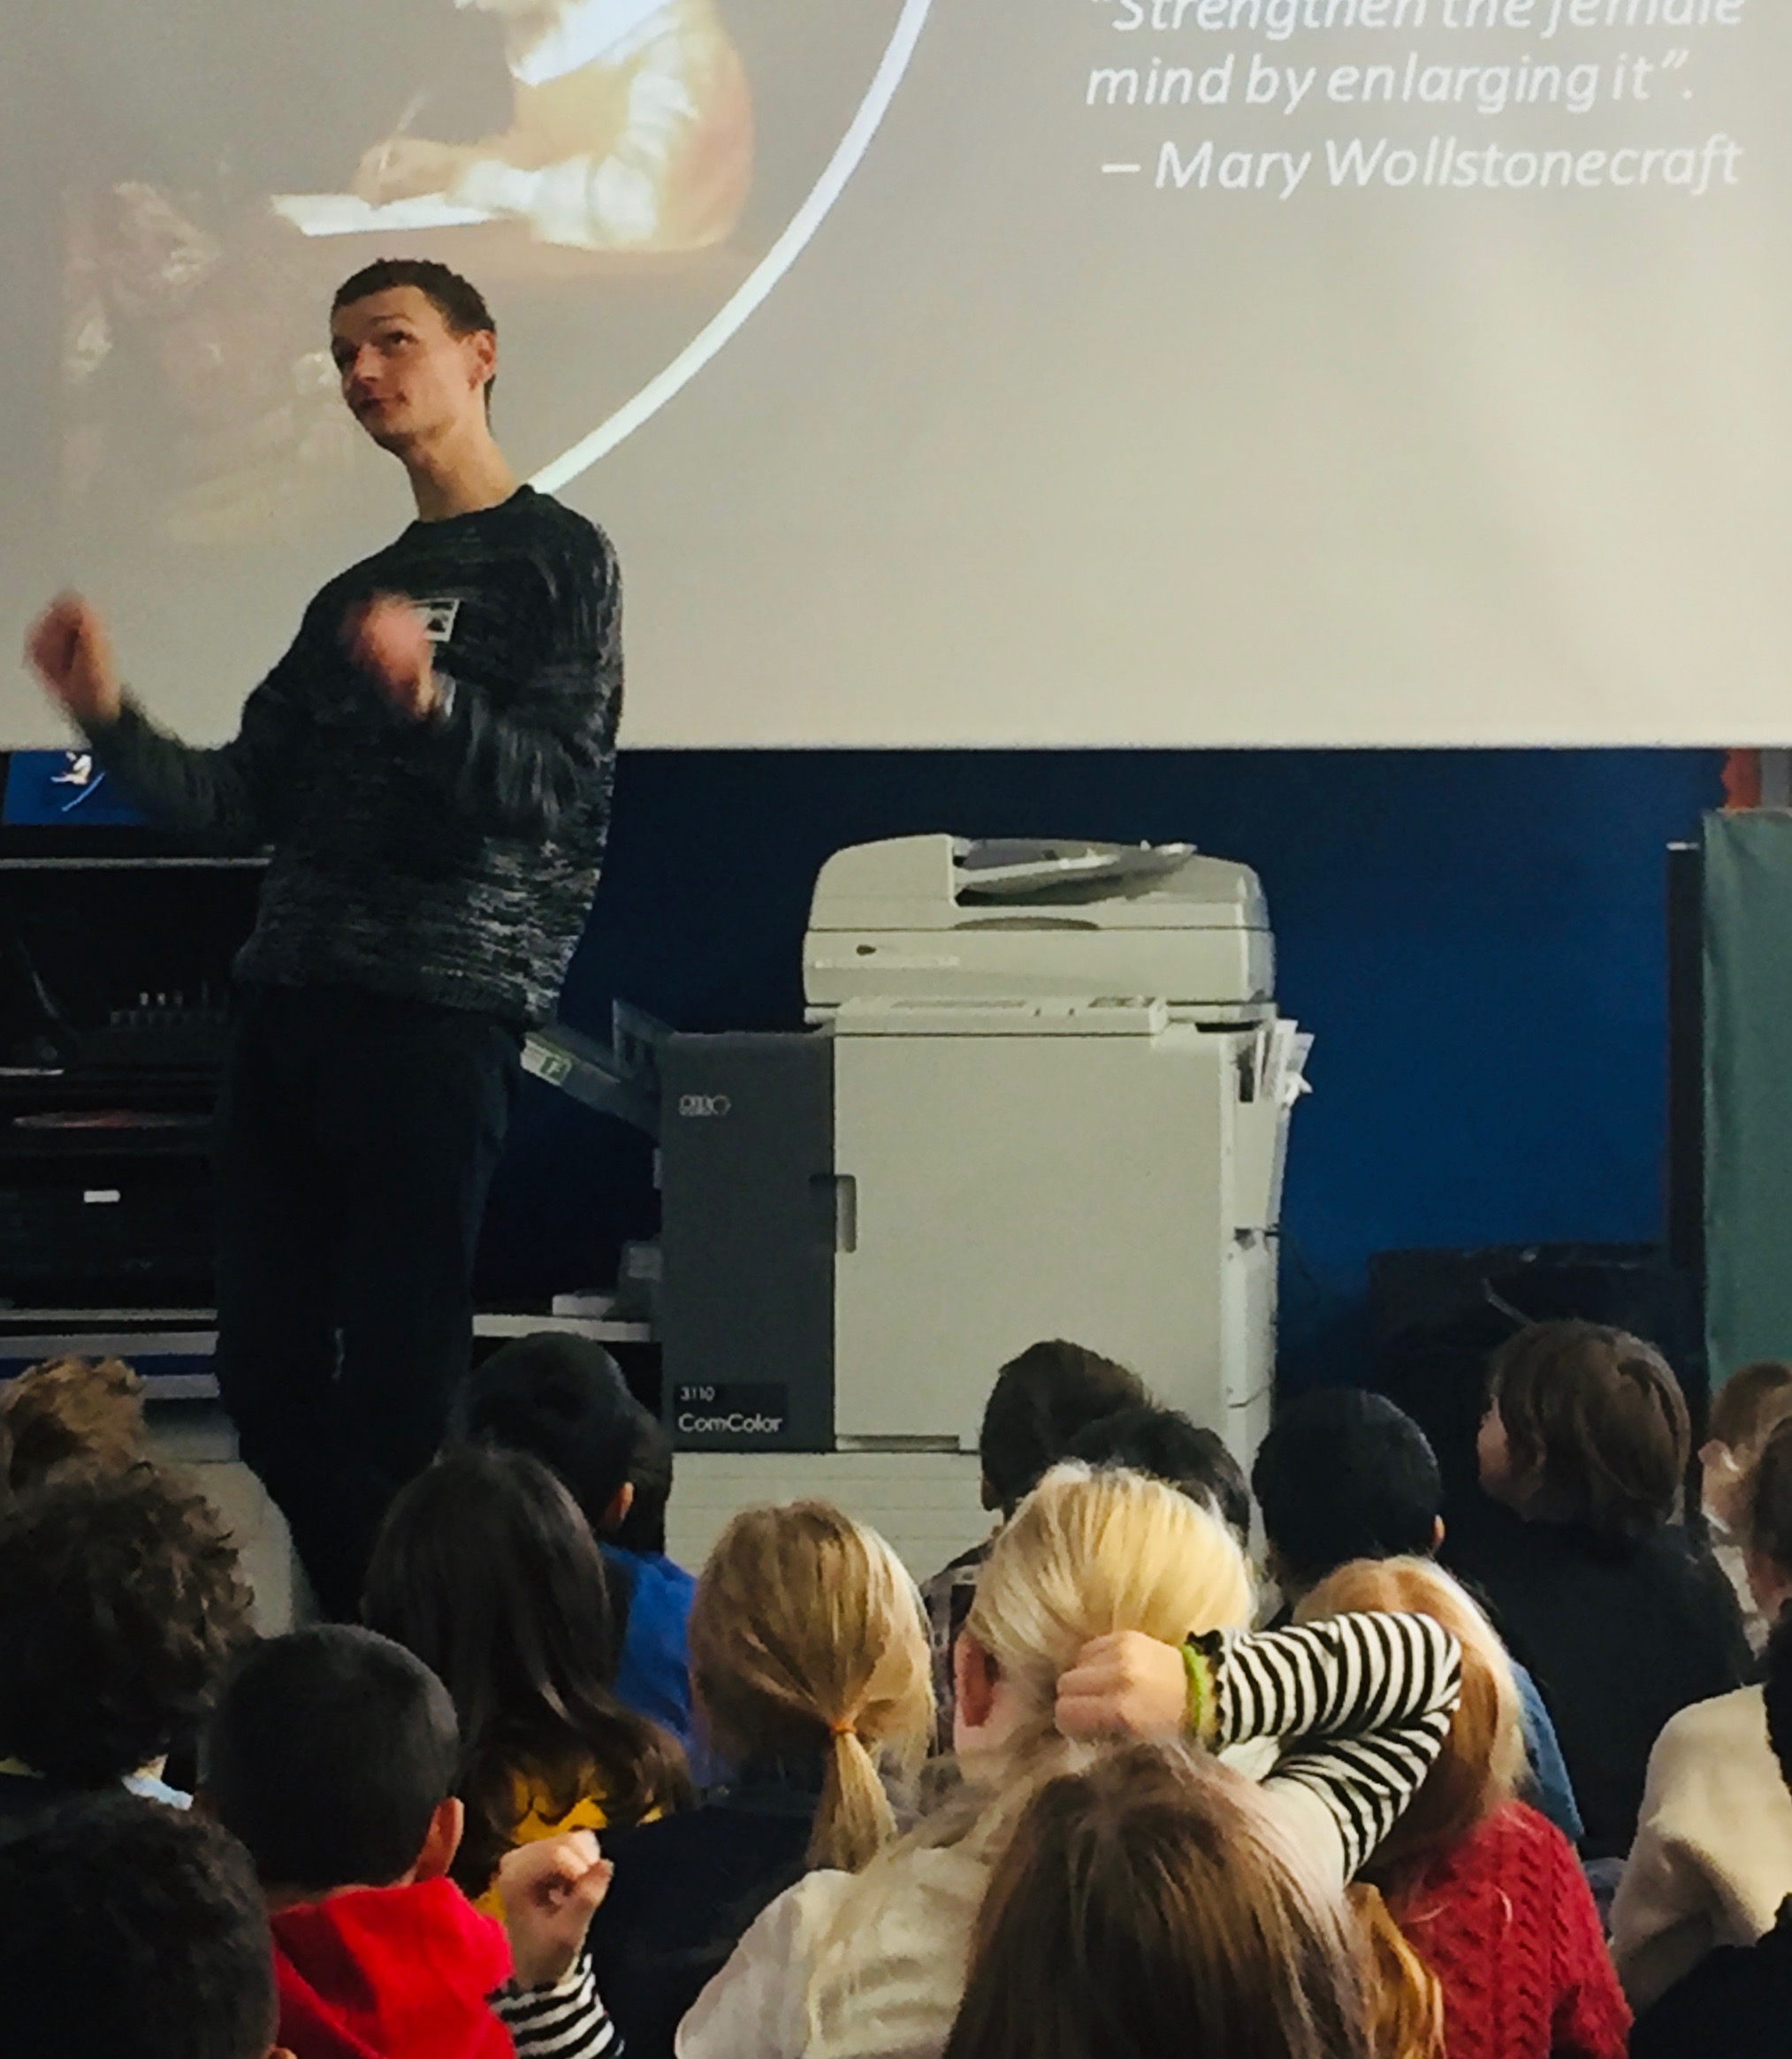 James Moriarty leads the pupils in our special Wollstonecraft song sung in a round